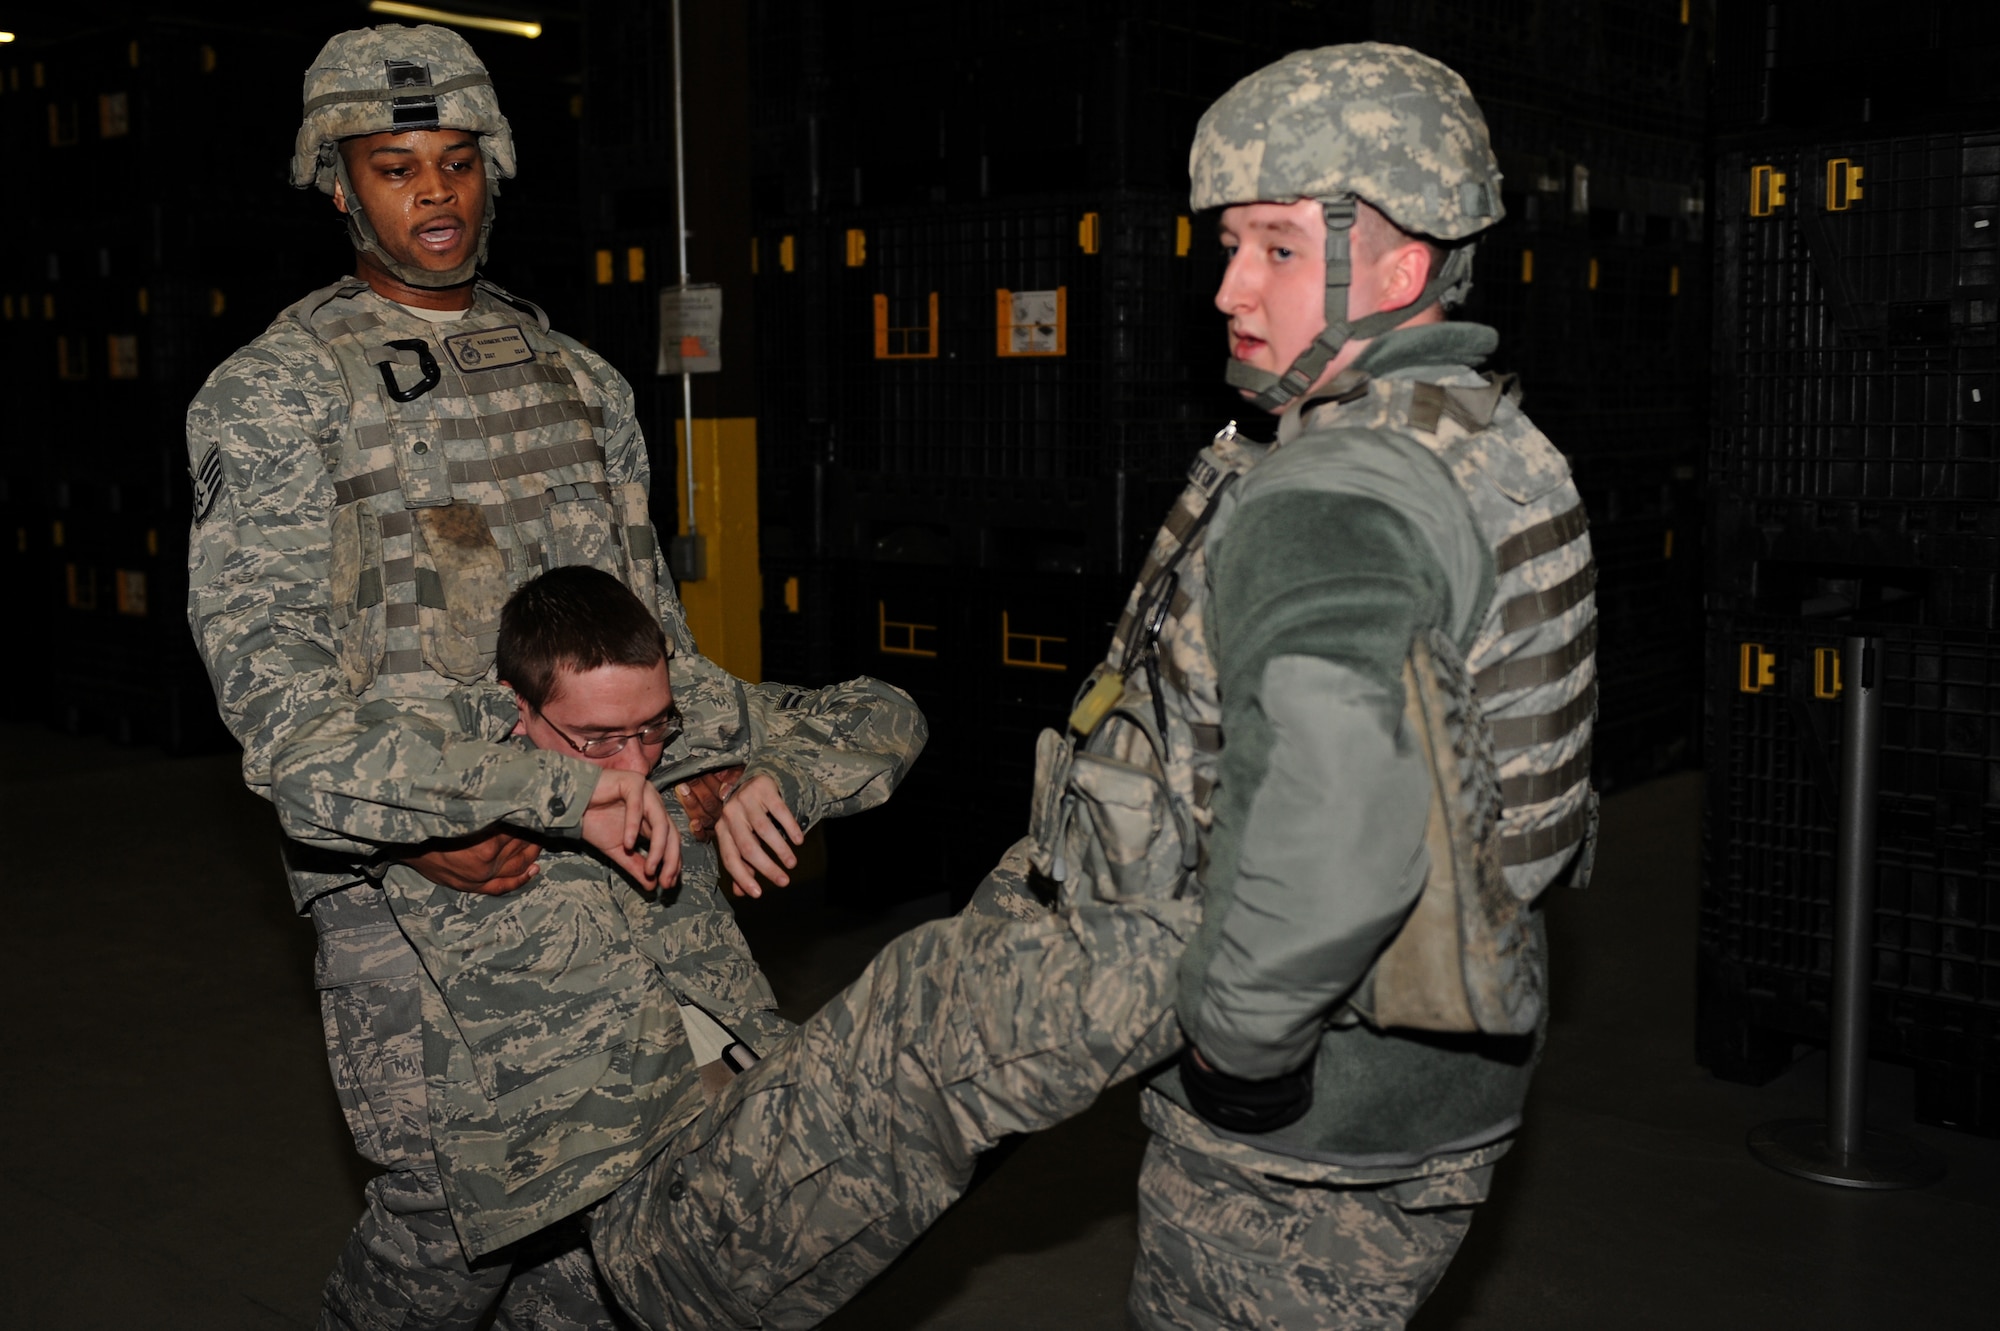 SPANGDAHLEM AIR BASE, Germany –Staff Sgt. Kasmere Redvine, left, and Senior Airman Nicholas Stockton, 52nd Security Forces Squadron first responders, carry a mock victim out of Bldg. 103 here during an active-shooter training exercise Feb. 17. The 52nd Fighter Wing conducted the exercise to test the wing’s response to an active-shooter situation. Training like this readies the base to respond to real emergency events protecting base members and U.S. government assets. (U.S. Air Force photo by Airman 1st Class Matthew B. Fredericks/Released)